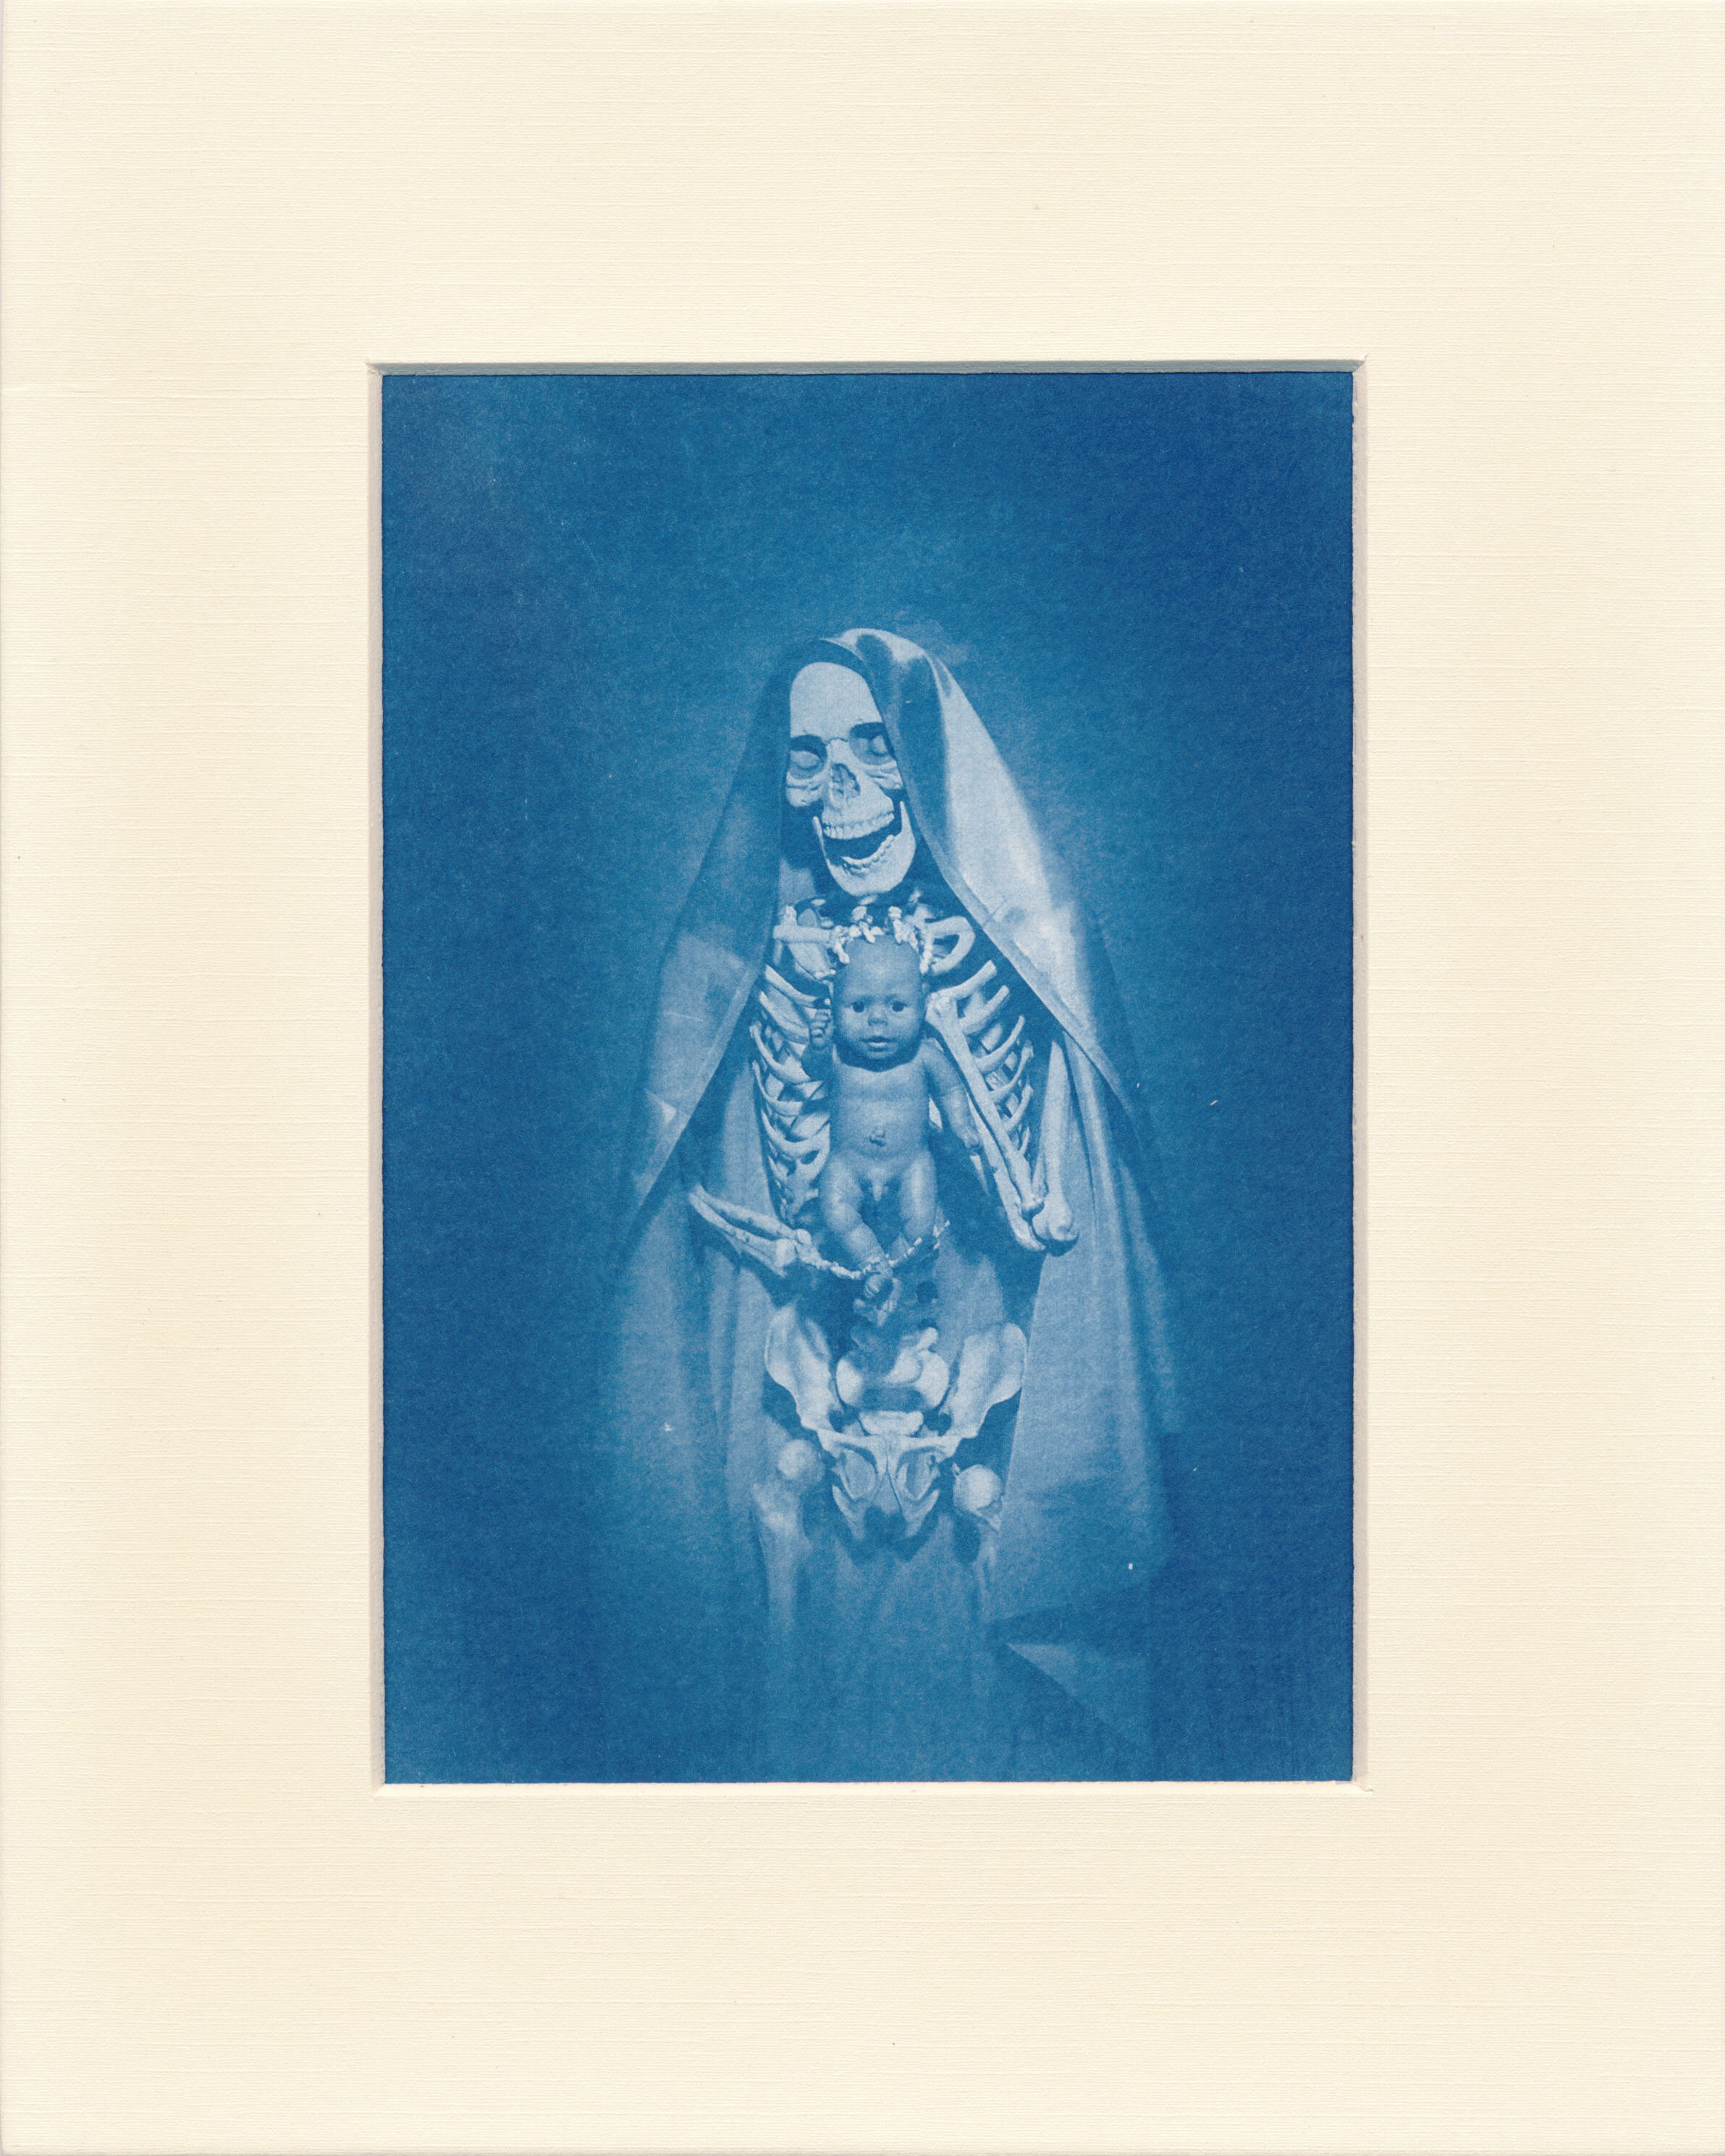  After the Madonna and Child  2015  Cyanotype  5x7 